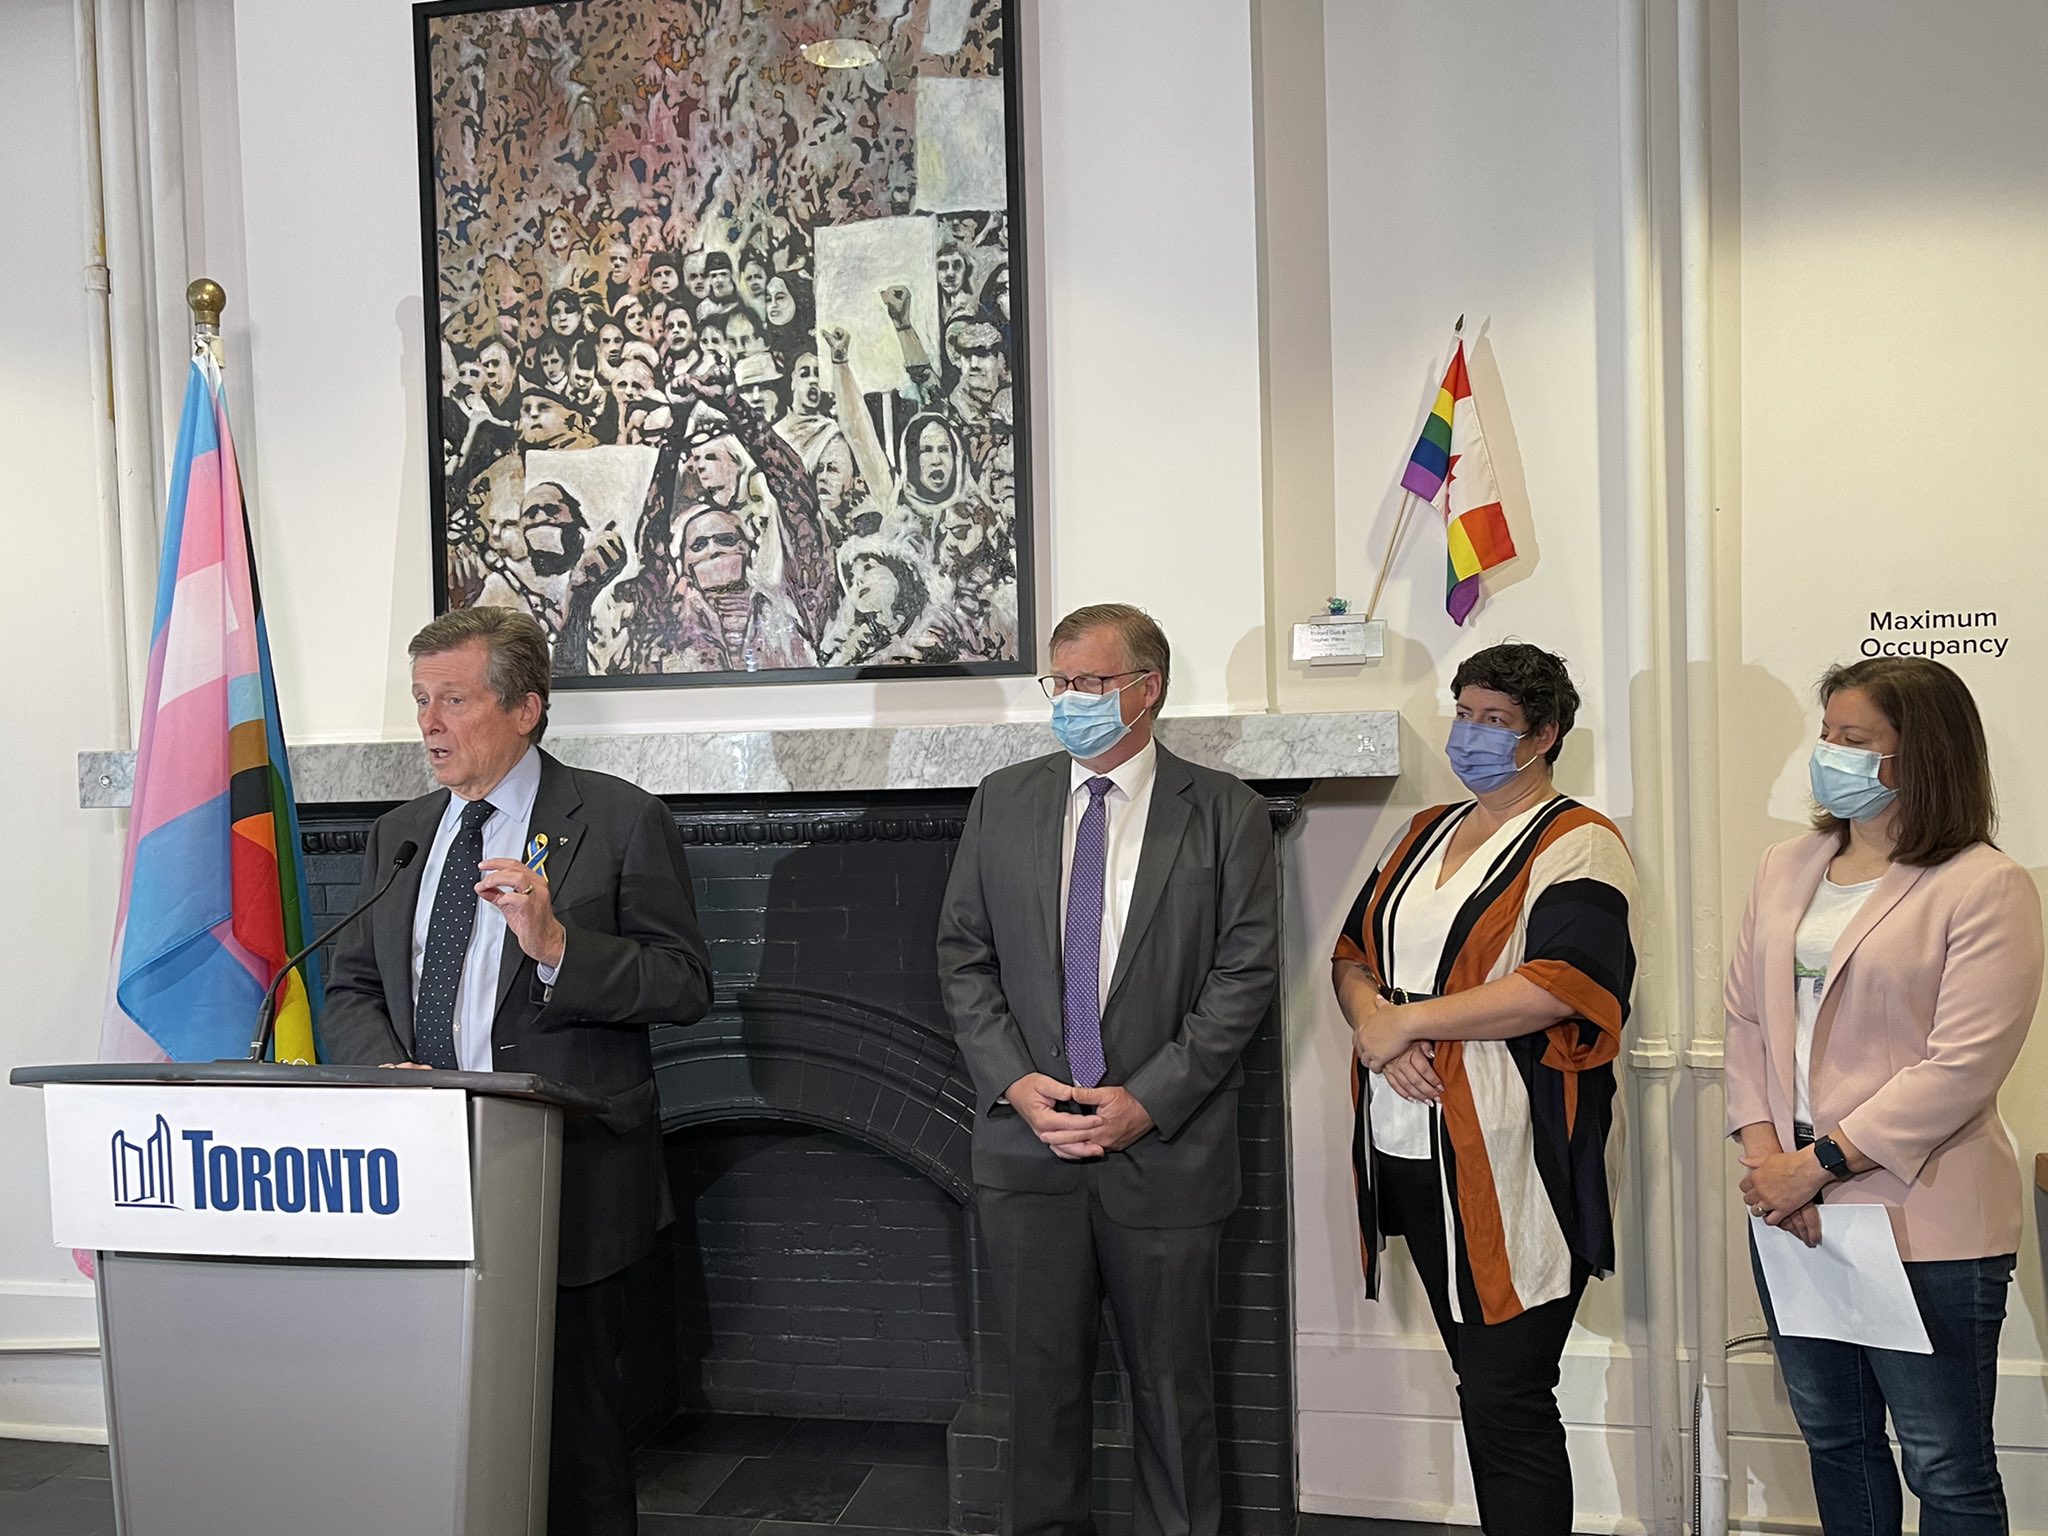 Mayor Tory announces funding for The 519 to expand activities and programs supporting 2SLGBTQ+ communities